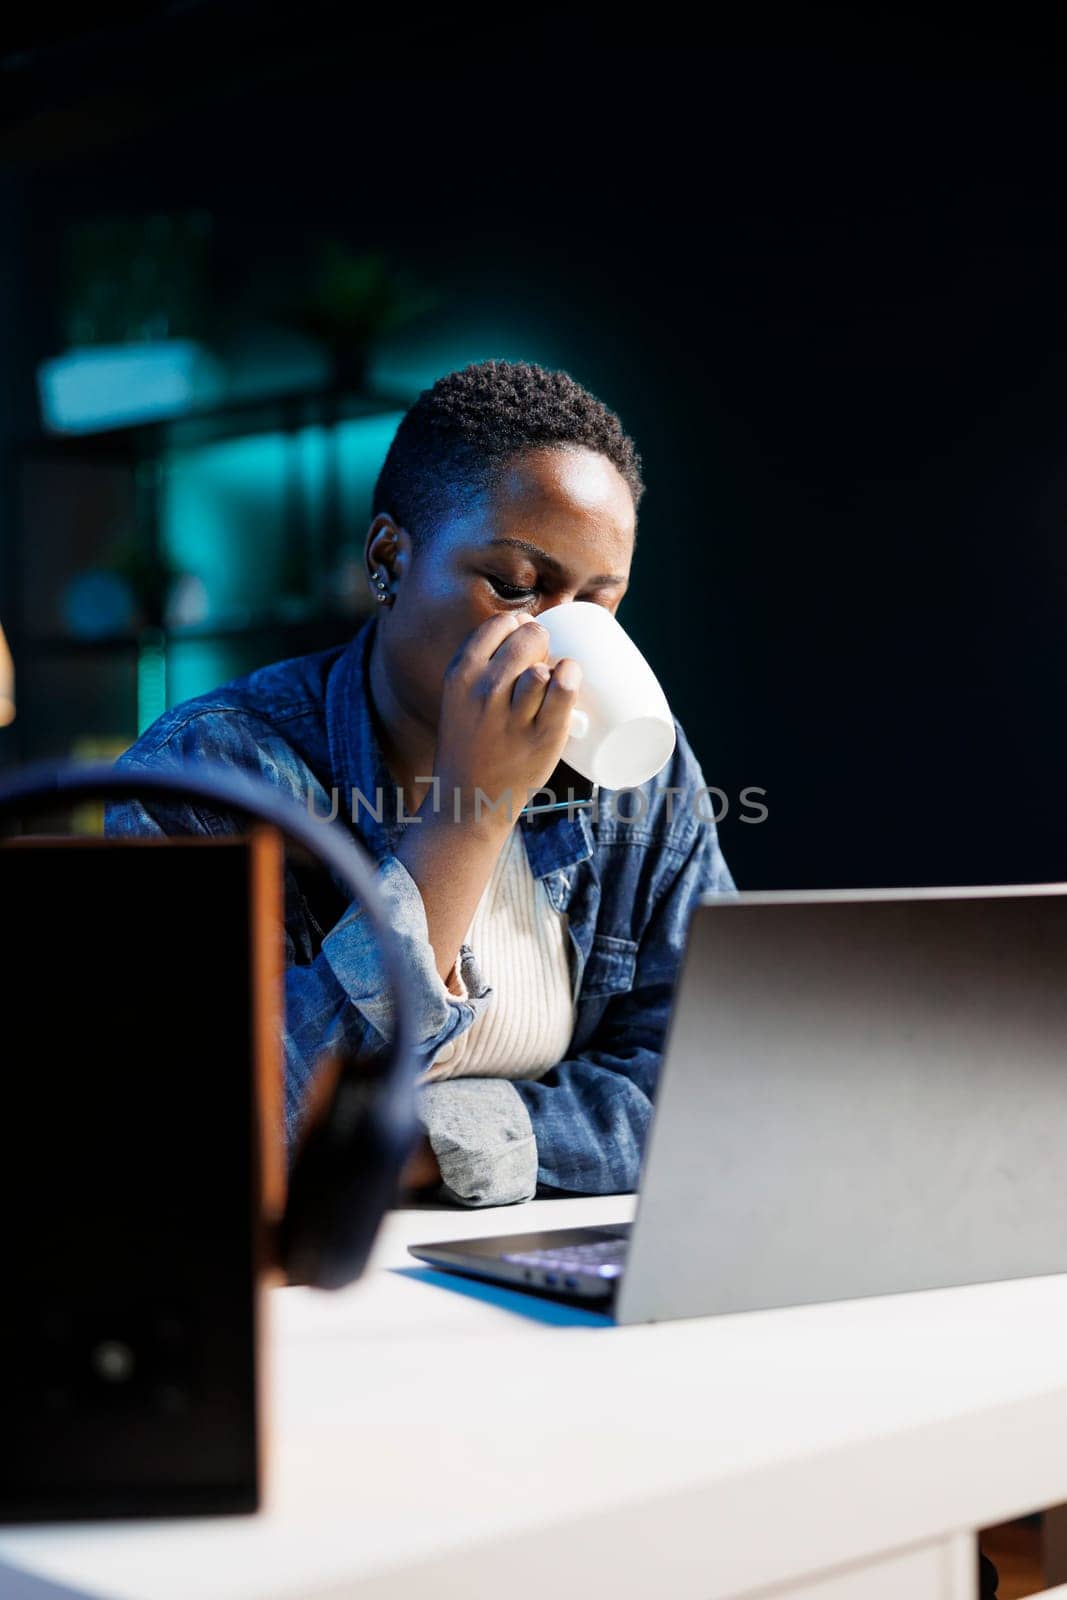 Portrait of african american remote worker drinking coffee while working on her digital laptop. Young black woman with wireless computer on desk is sipping beverage from a cup.